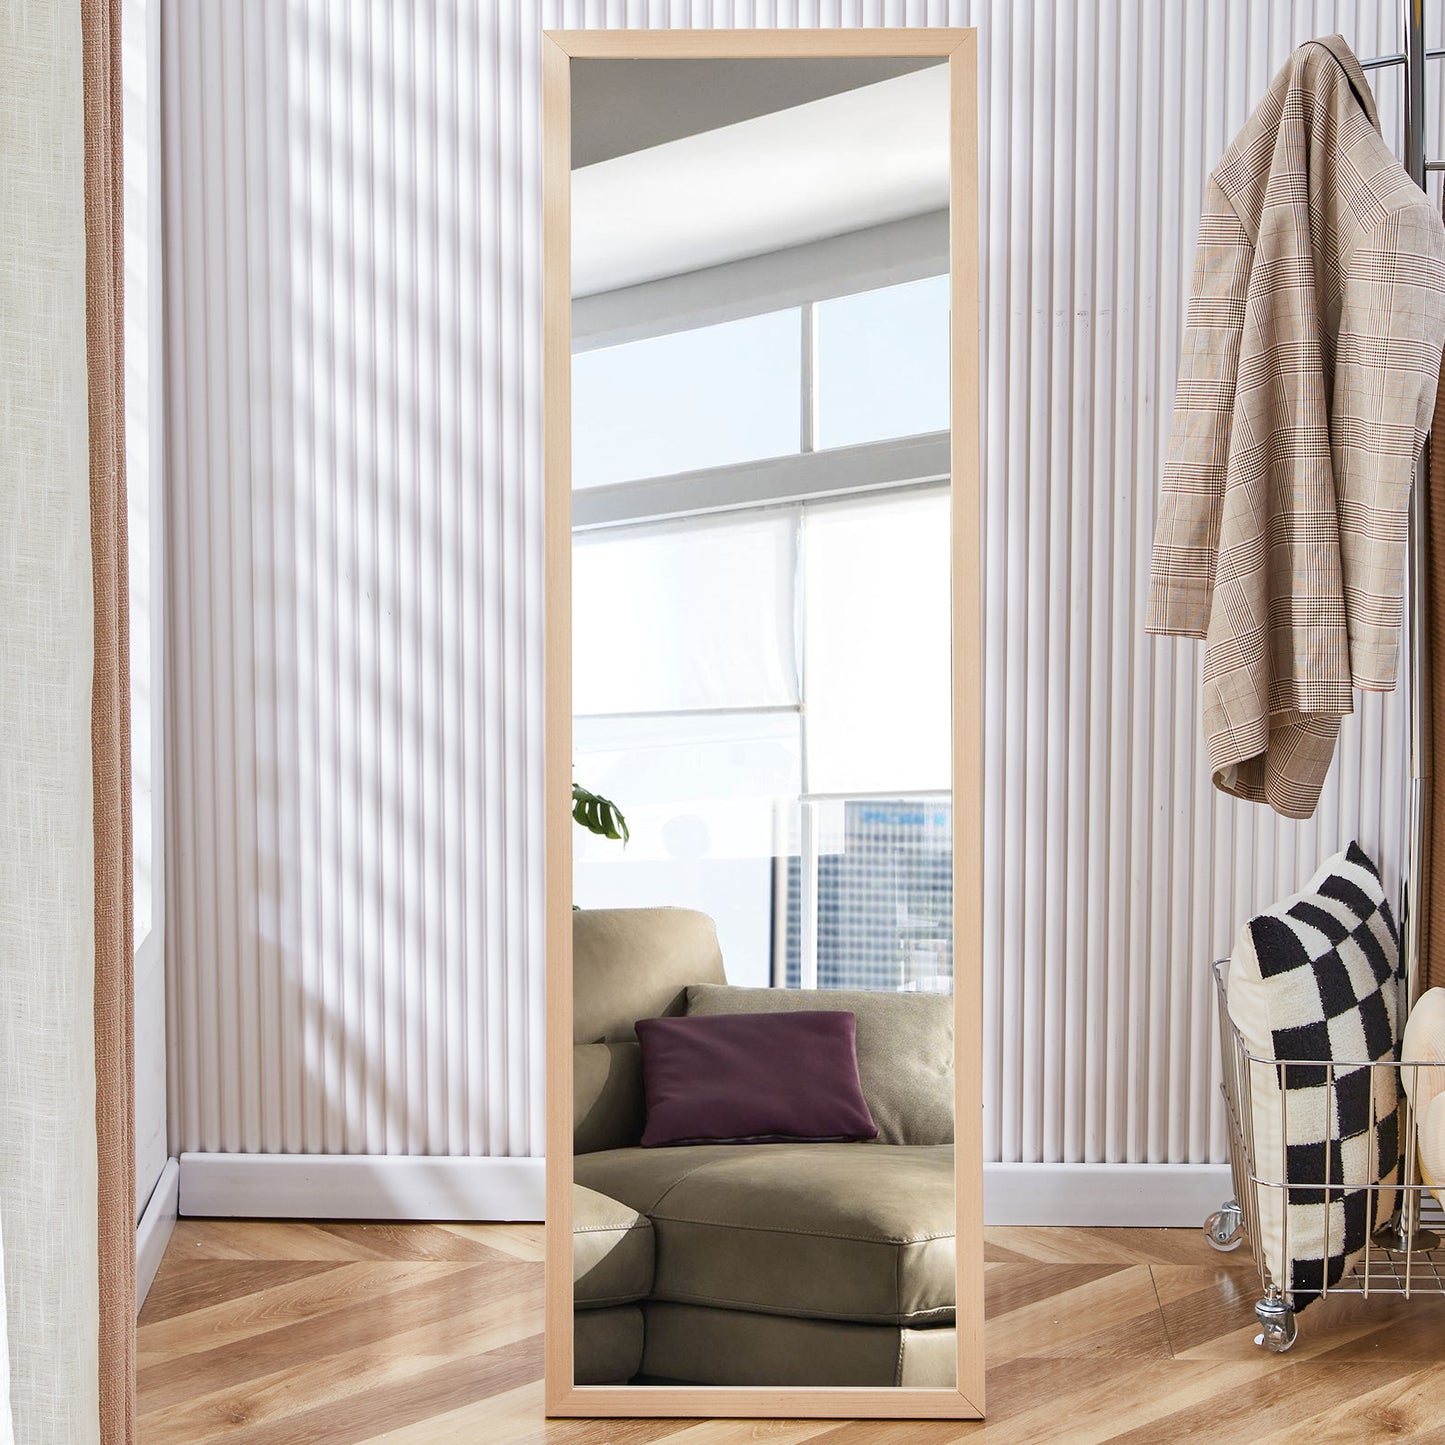 Third generation packaging upgrade, thickened border,  full length mirror, dressing mirror, bedroom entrance, decorative mirror, clothing store, mirror. 57.9"*18.1"